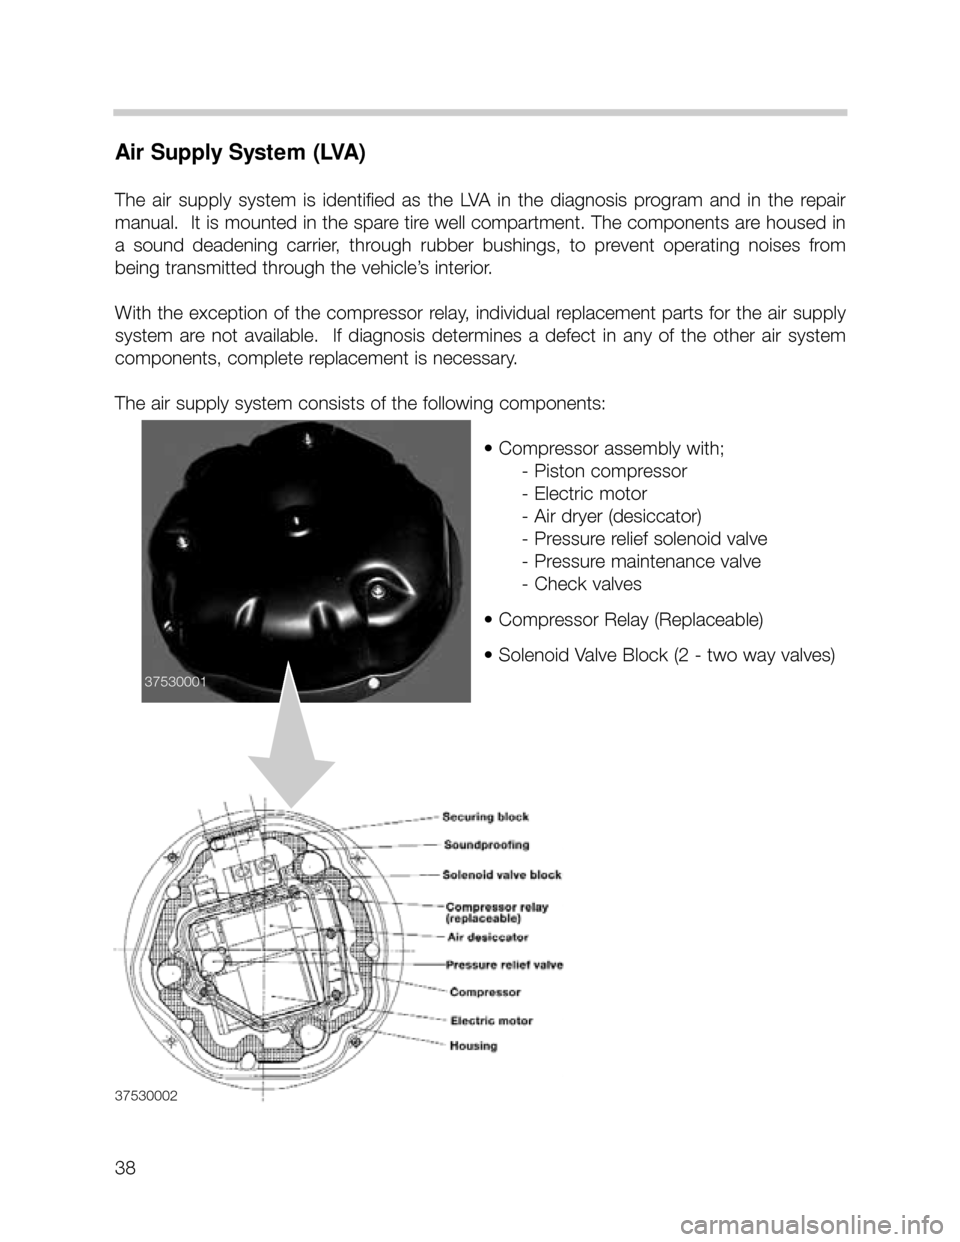 BMW X5 2001 E53 Workshop Manual Air Supply System (LVA)
The  air  supply  system  is  identified  as  the  LVA  in  the  diagnosis  program  and  in  the  repair
manual.  It is mounted in the spare tire well compartment. The compone